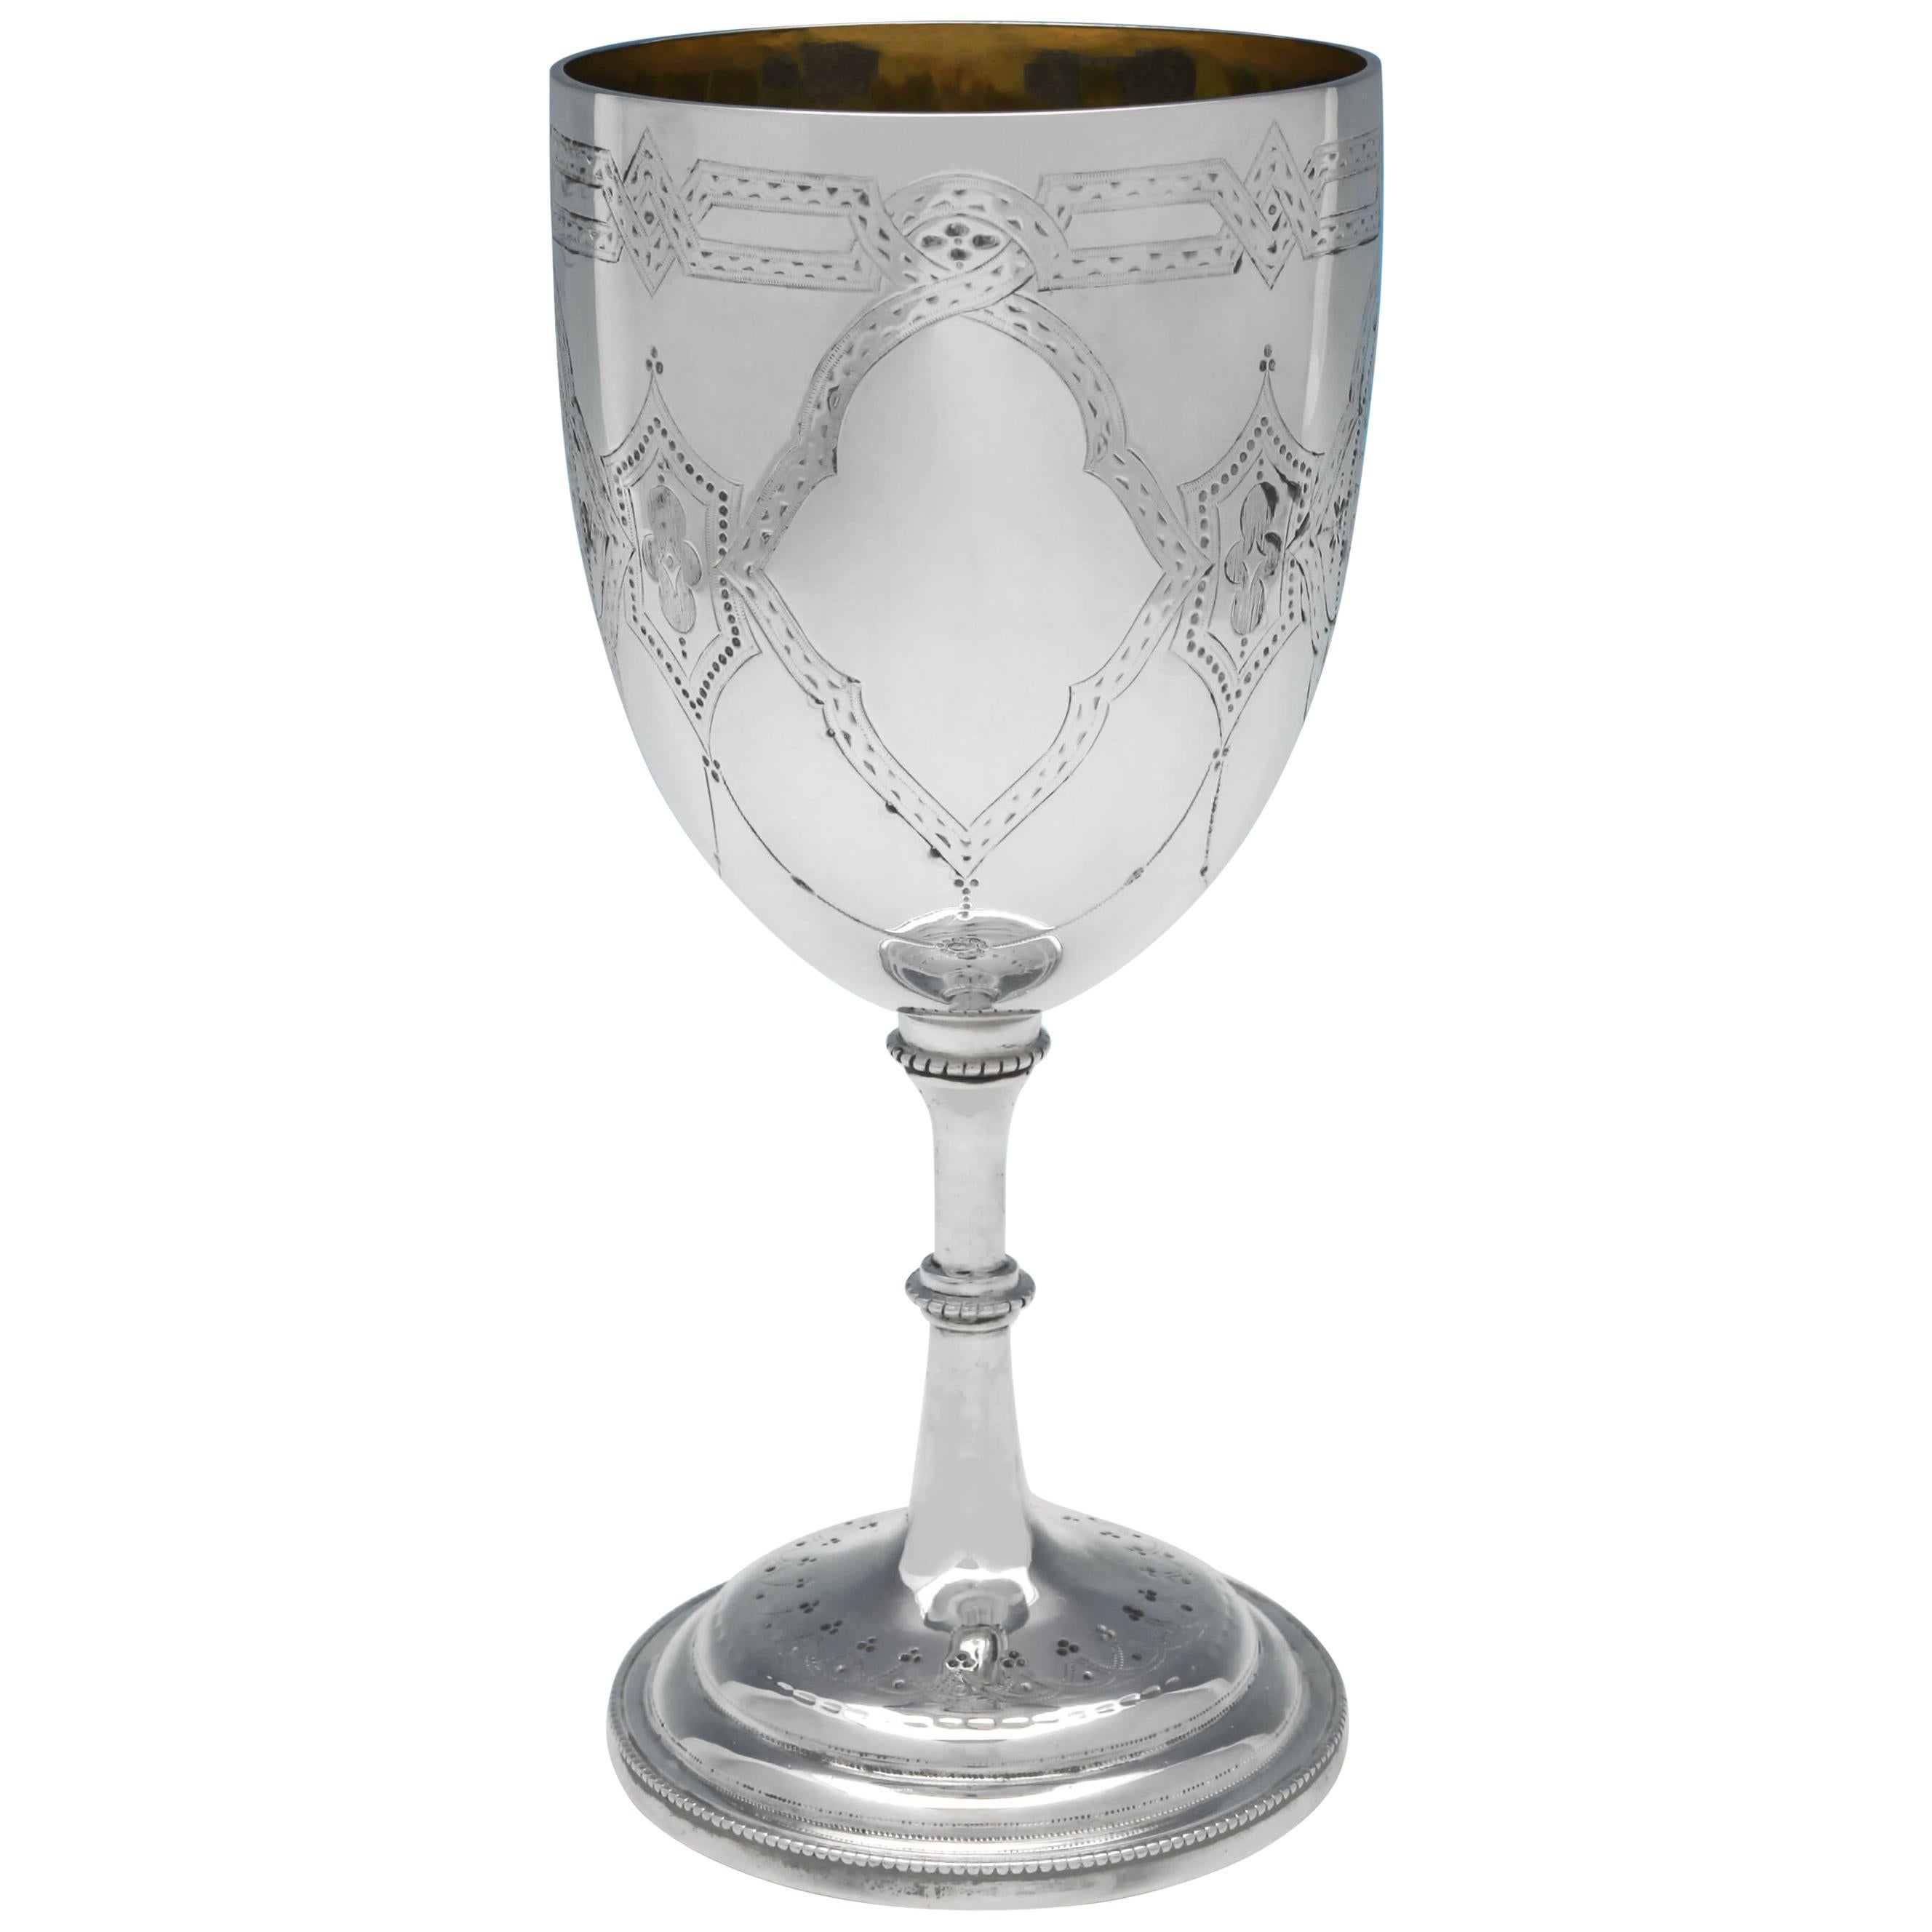 Victorian Antique Sterling Silver Goblet with Engraved Decoration